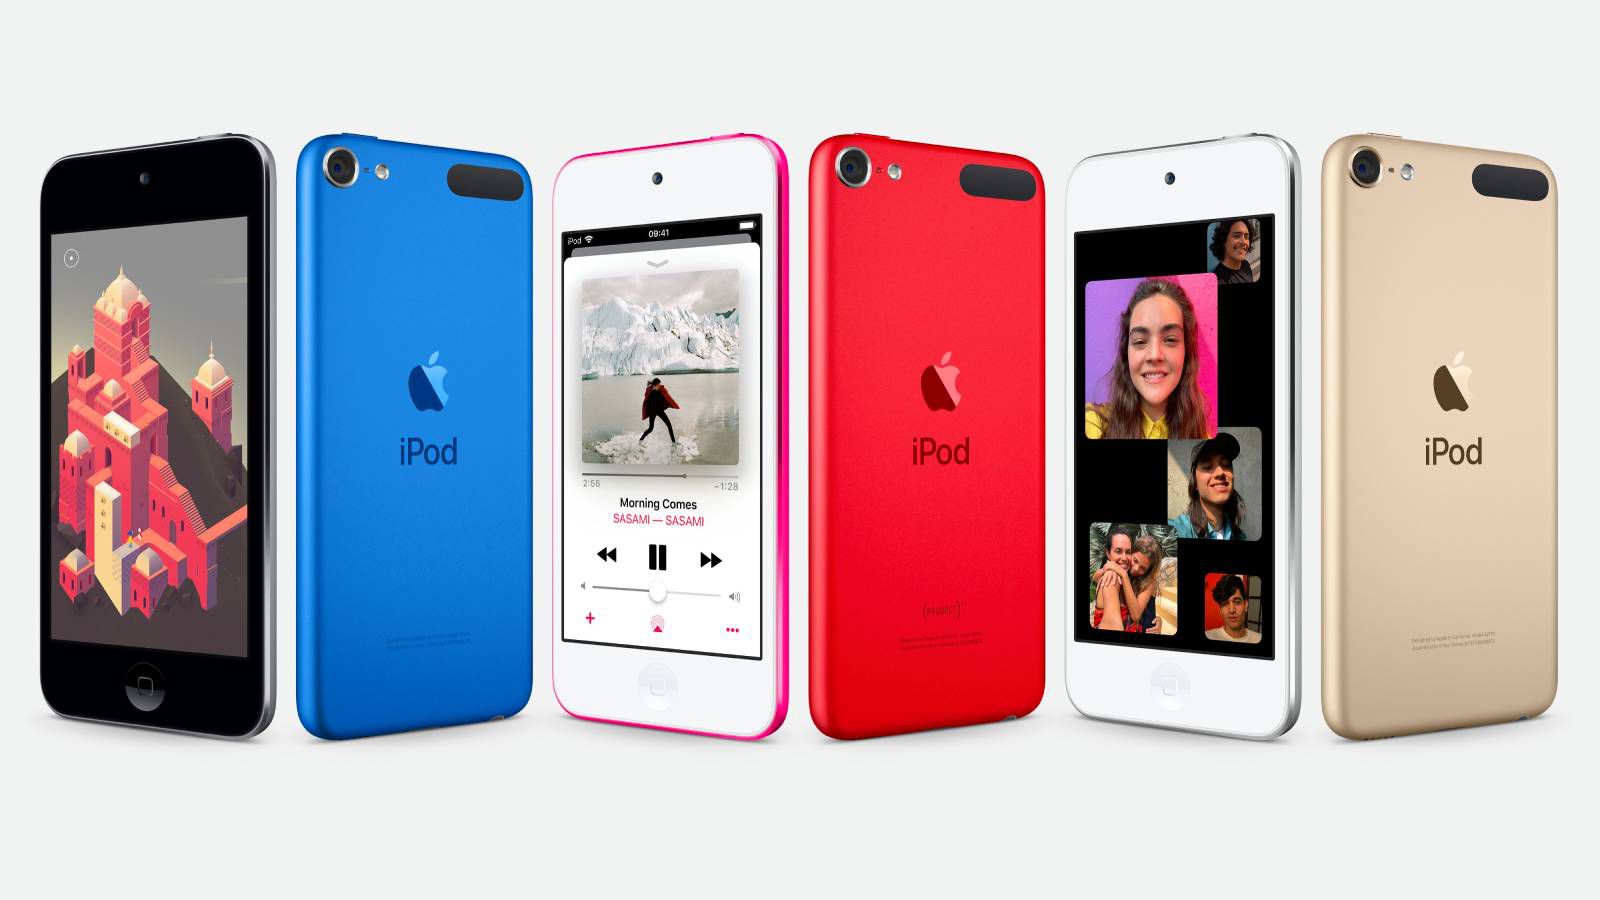 iPod Touch Already 'Sold Out' in Some Configurations After Being Discontinued